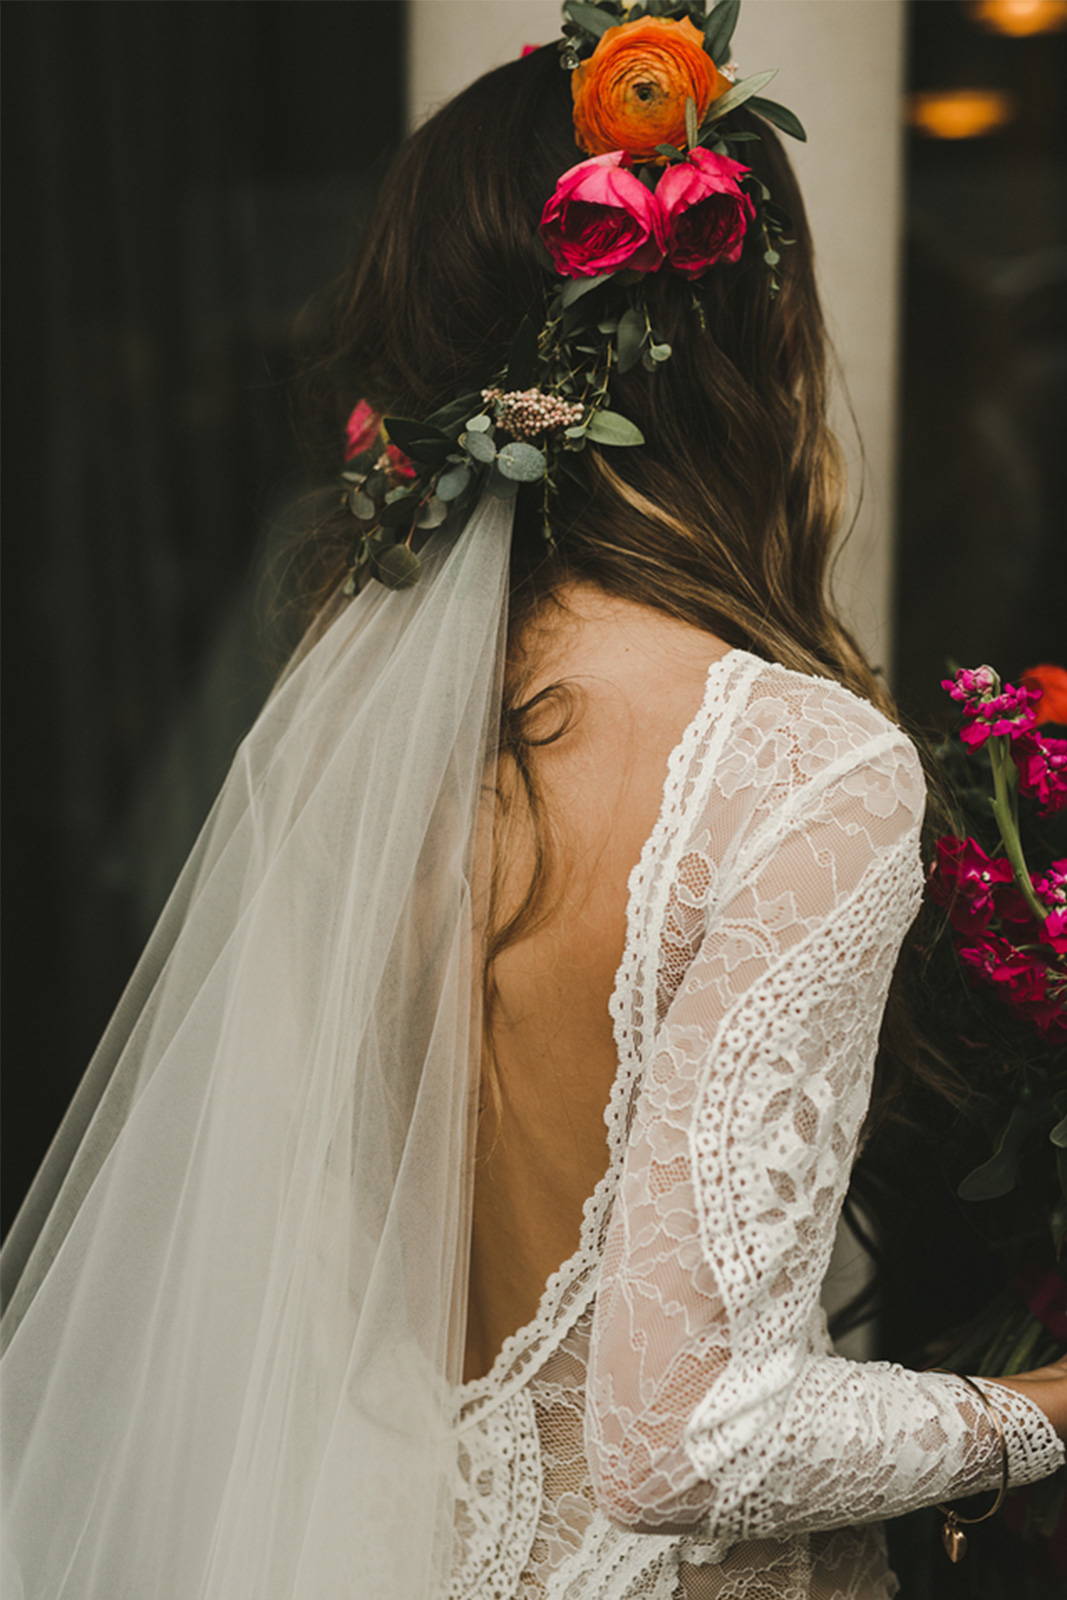 Bride in low back lace dress with flowers in hair